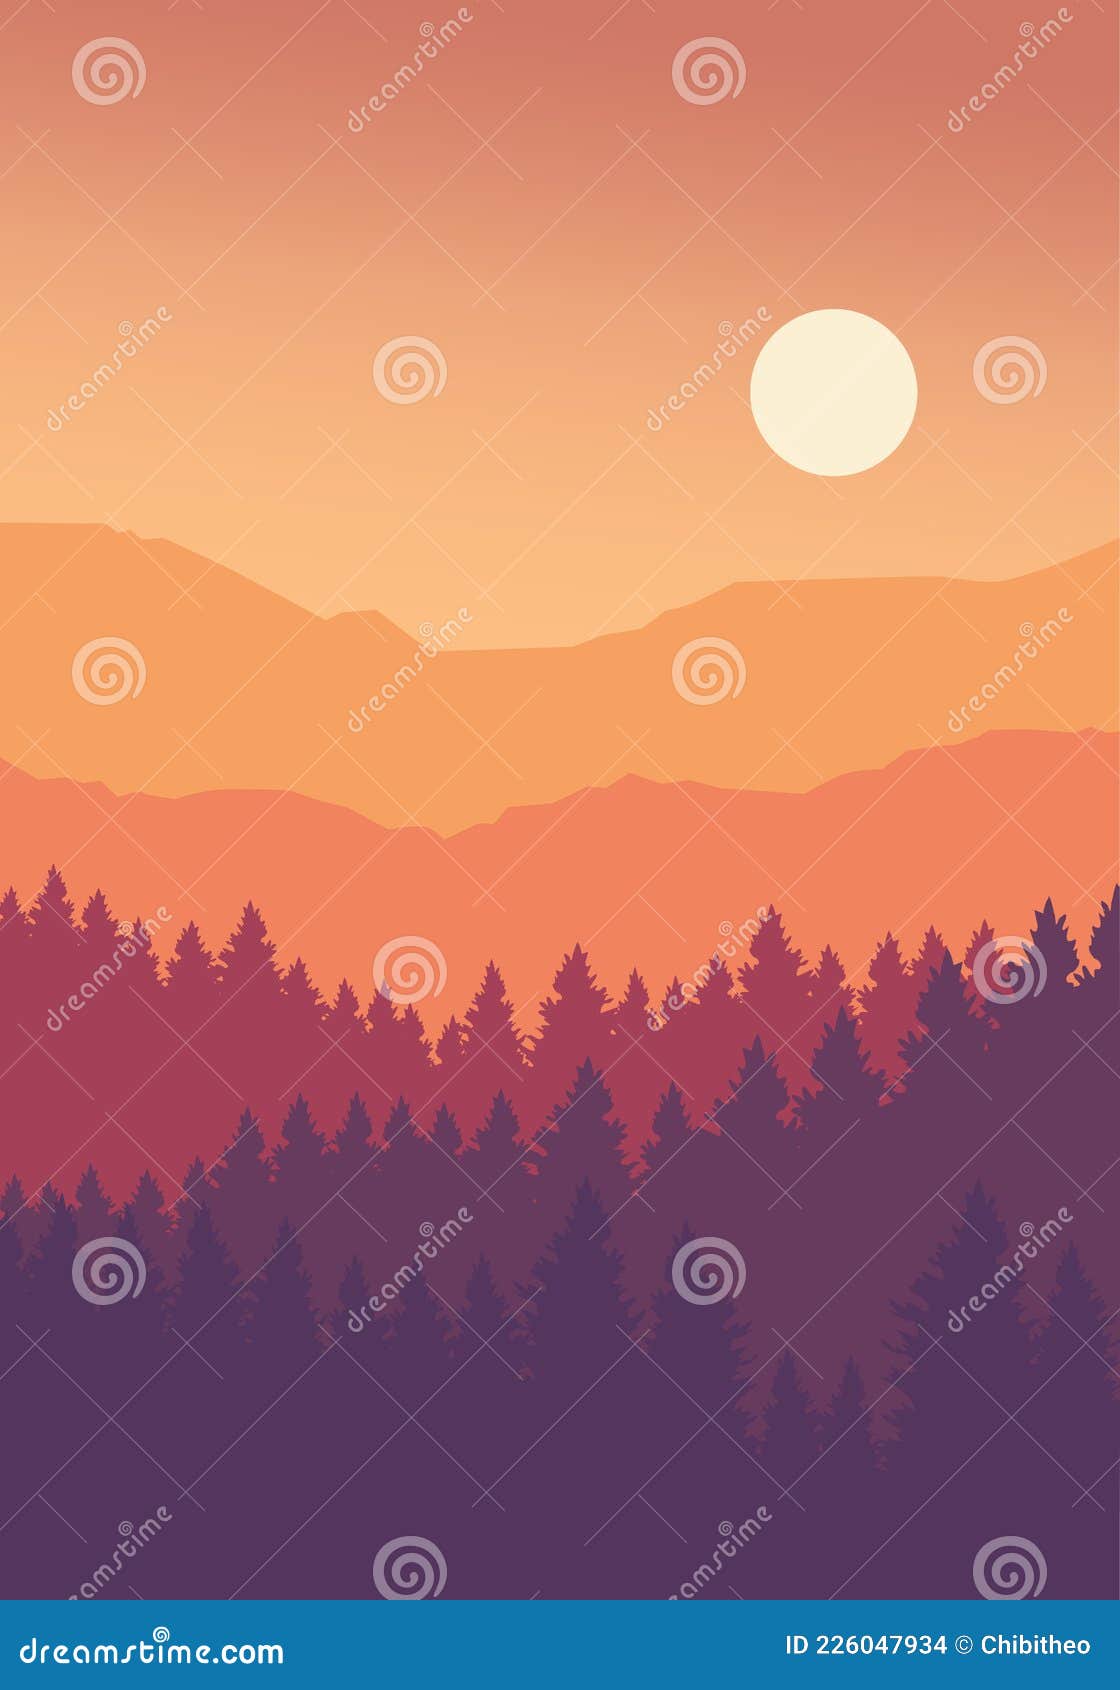 312392 Mobile Wallpapers Images Stock Photos  Vectors  Shutterstock